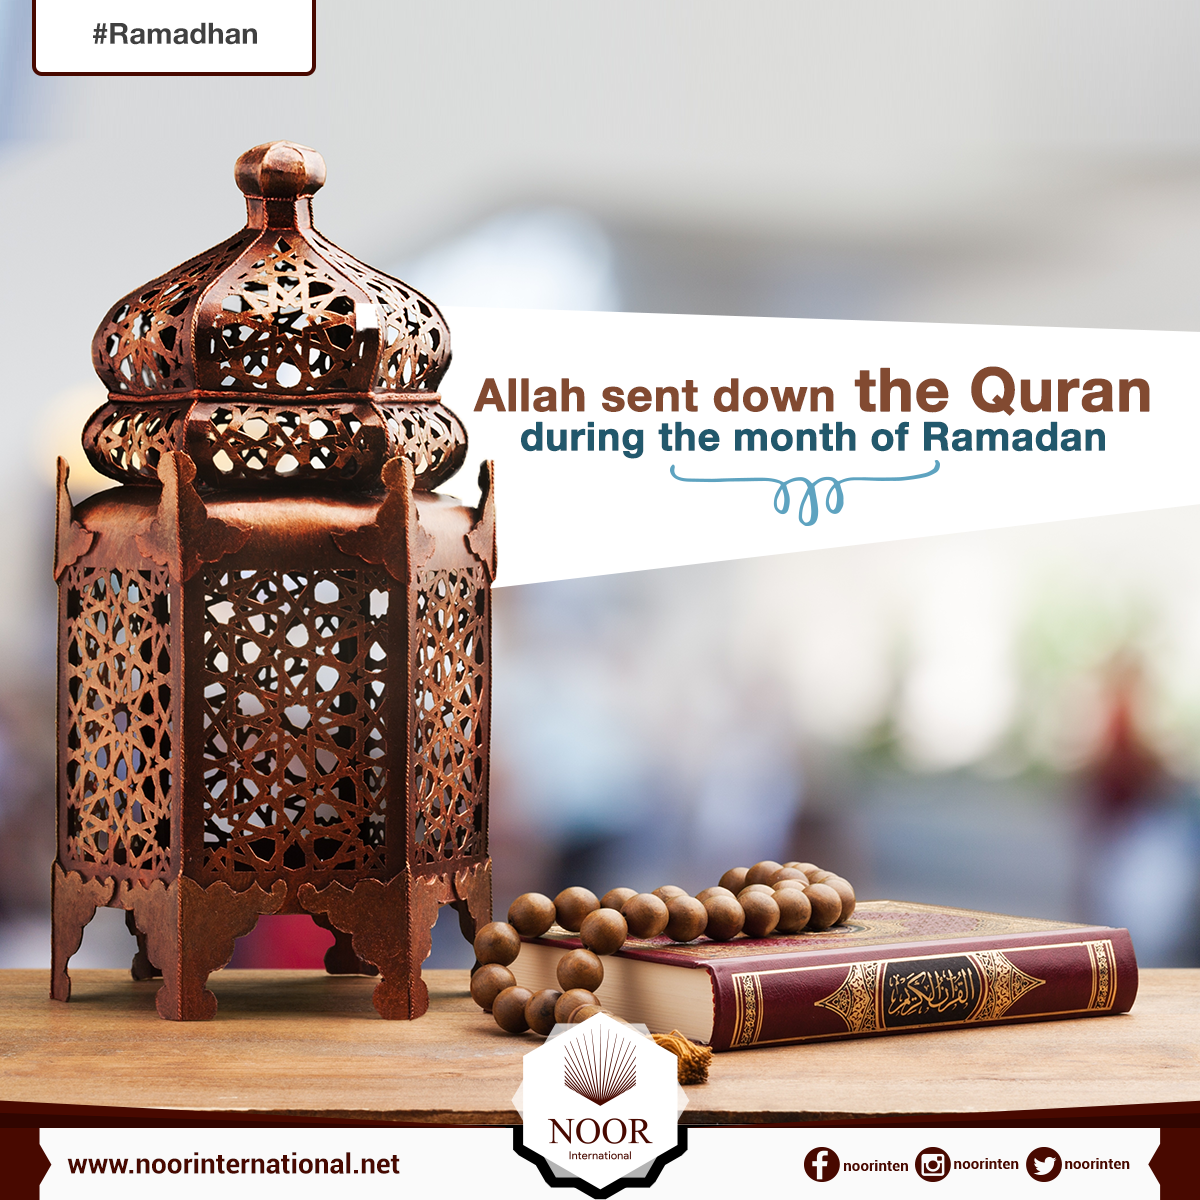 Allah sent down the Quran during the month of Ramadan